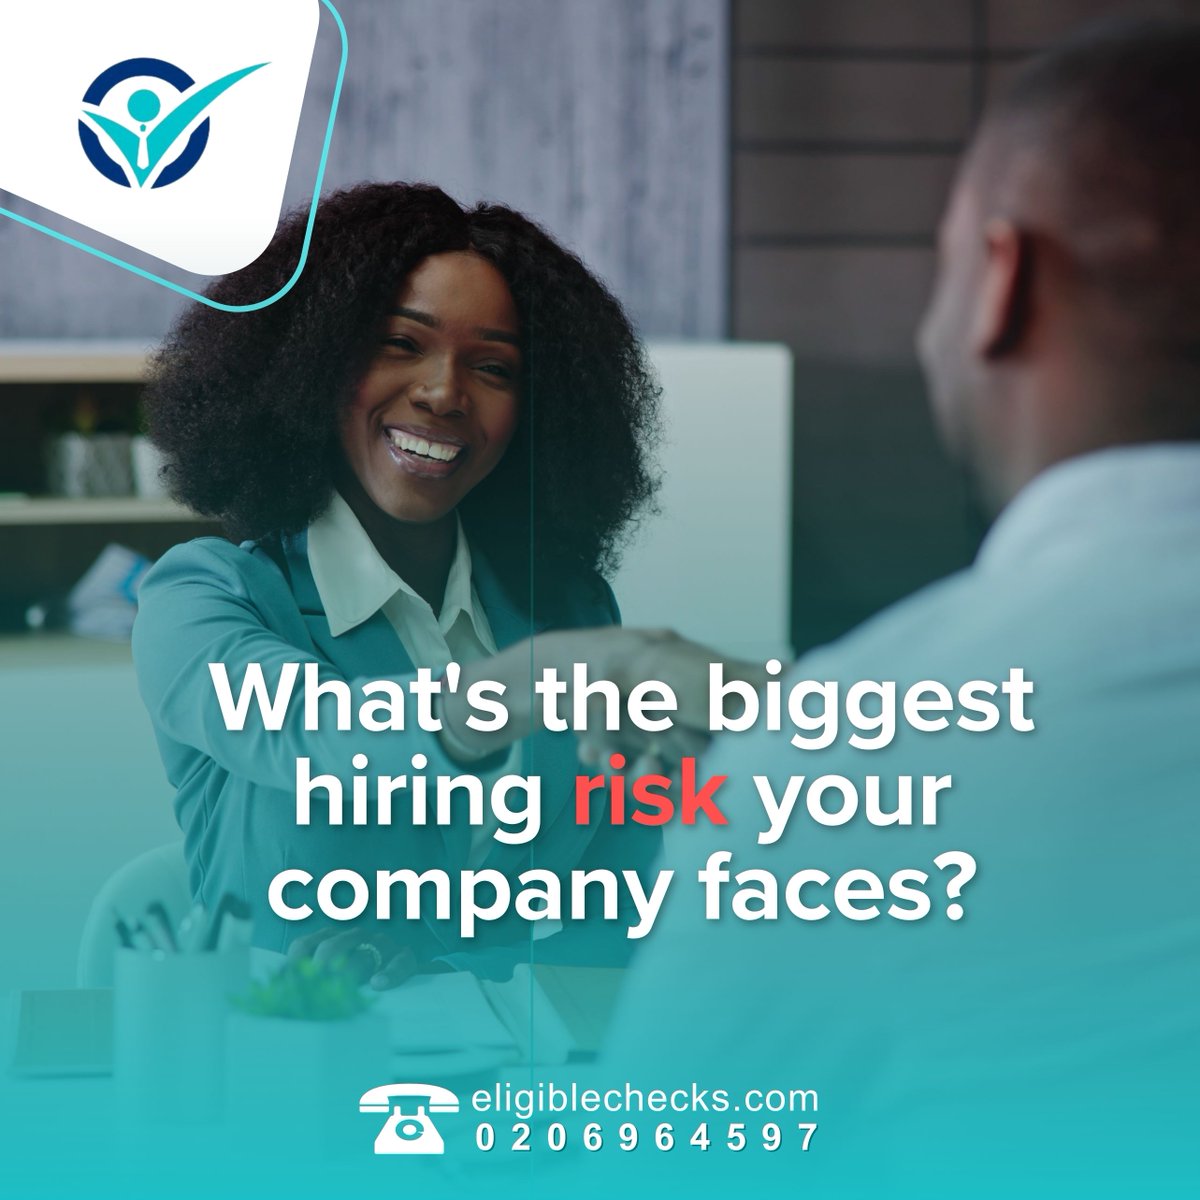 What's the biggest hiring risk your company faces?   

Share your thoughts in the comments! 

Learn how Eligible Background Checks can help your business avoid potential risks in hiring👉eligiblechecks.com/contact-4

#HiringChallenges #BackgroundChecks #HiringRisks